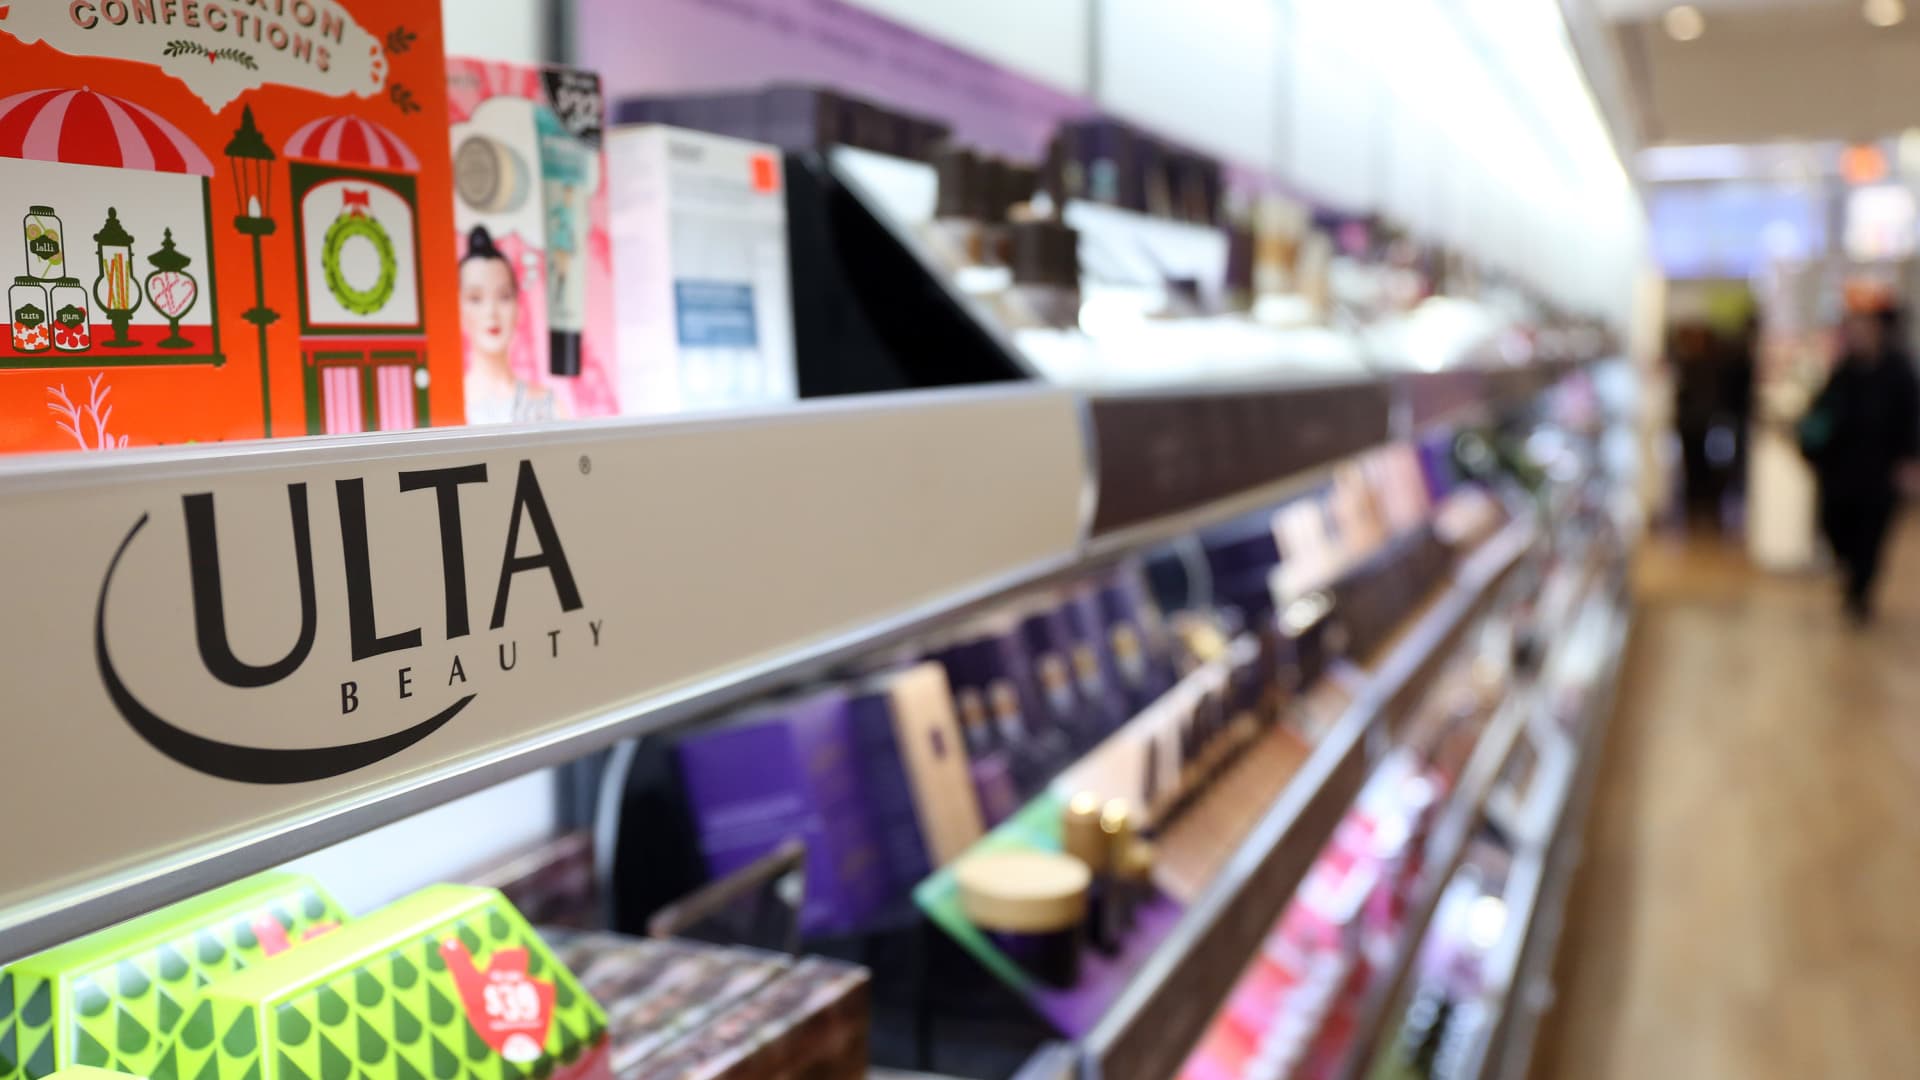 Stocks making the biggest moves midday: Ulta Beauty, Netflix, American Express, Ibotta and more - CNBC